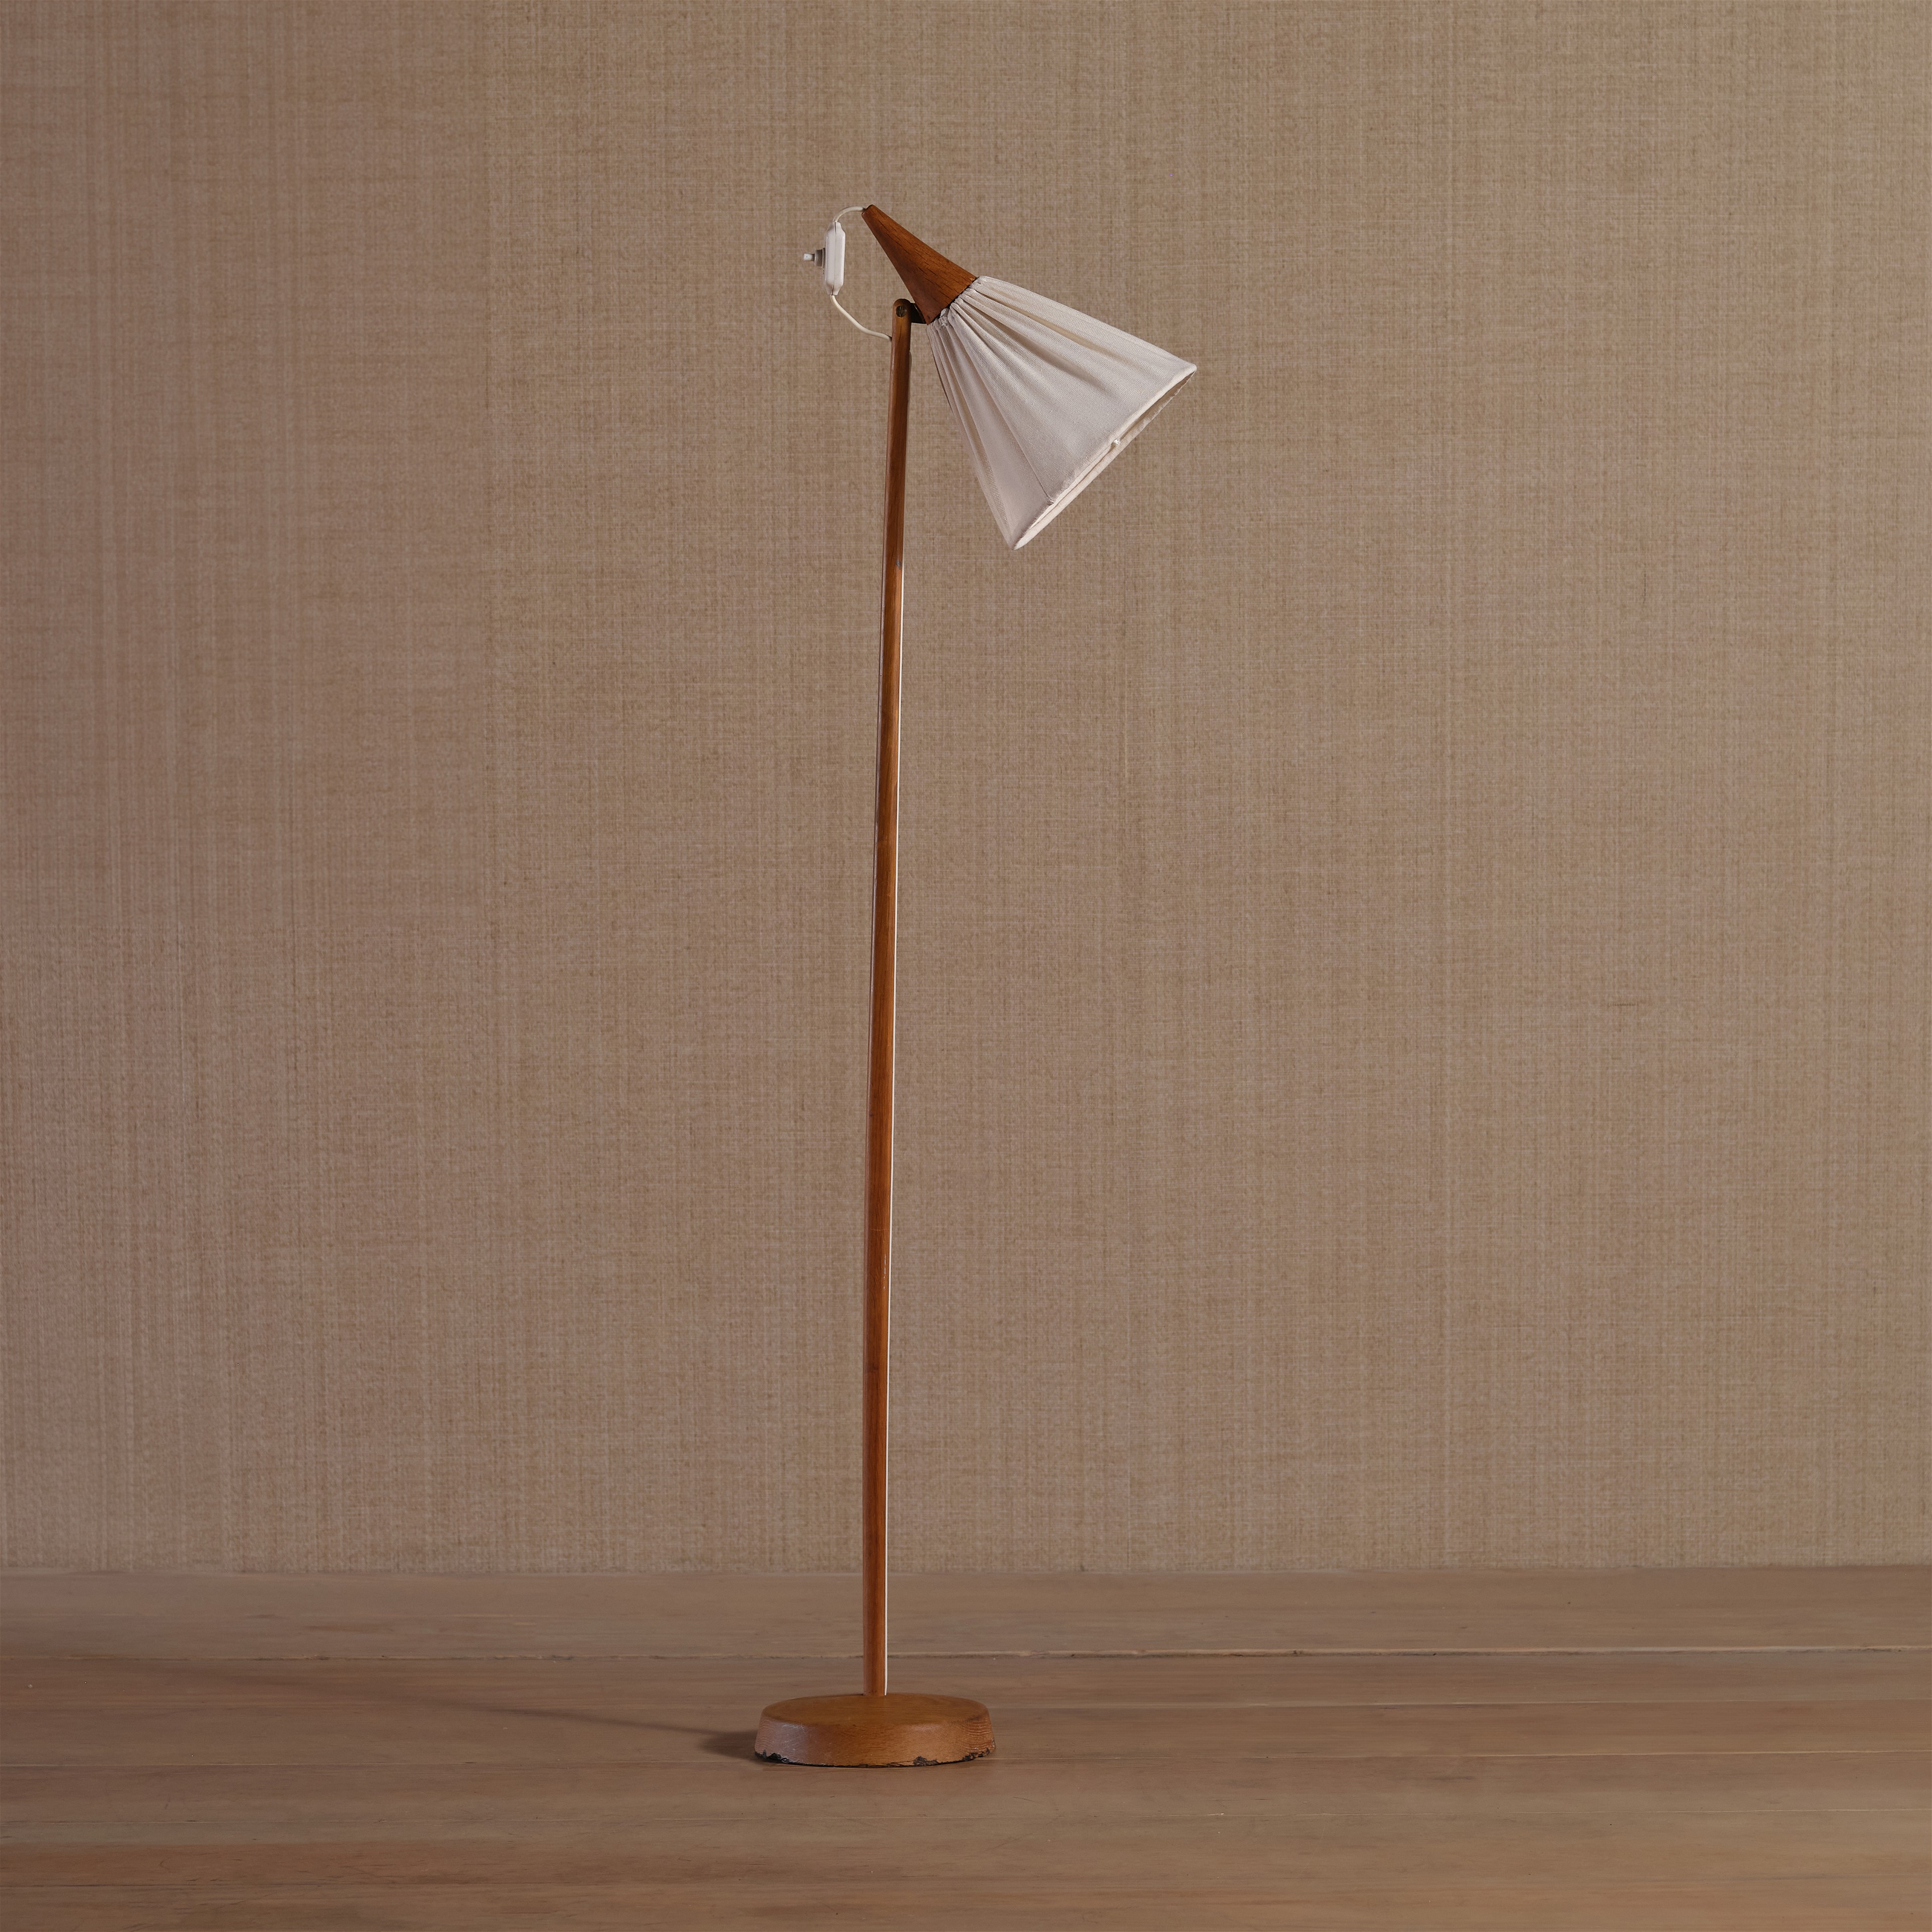 a wooden floor lamp with a white cloth shade